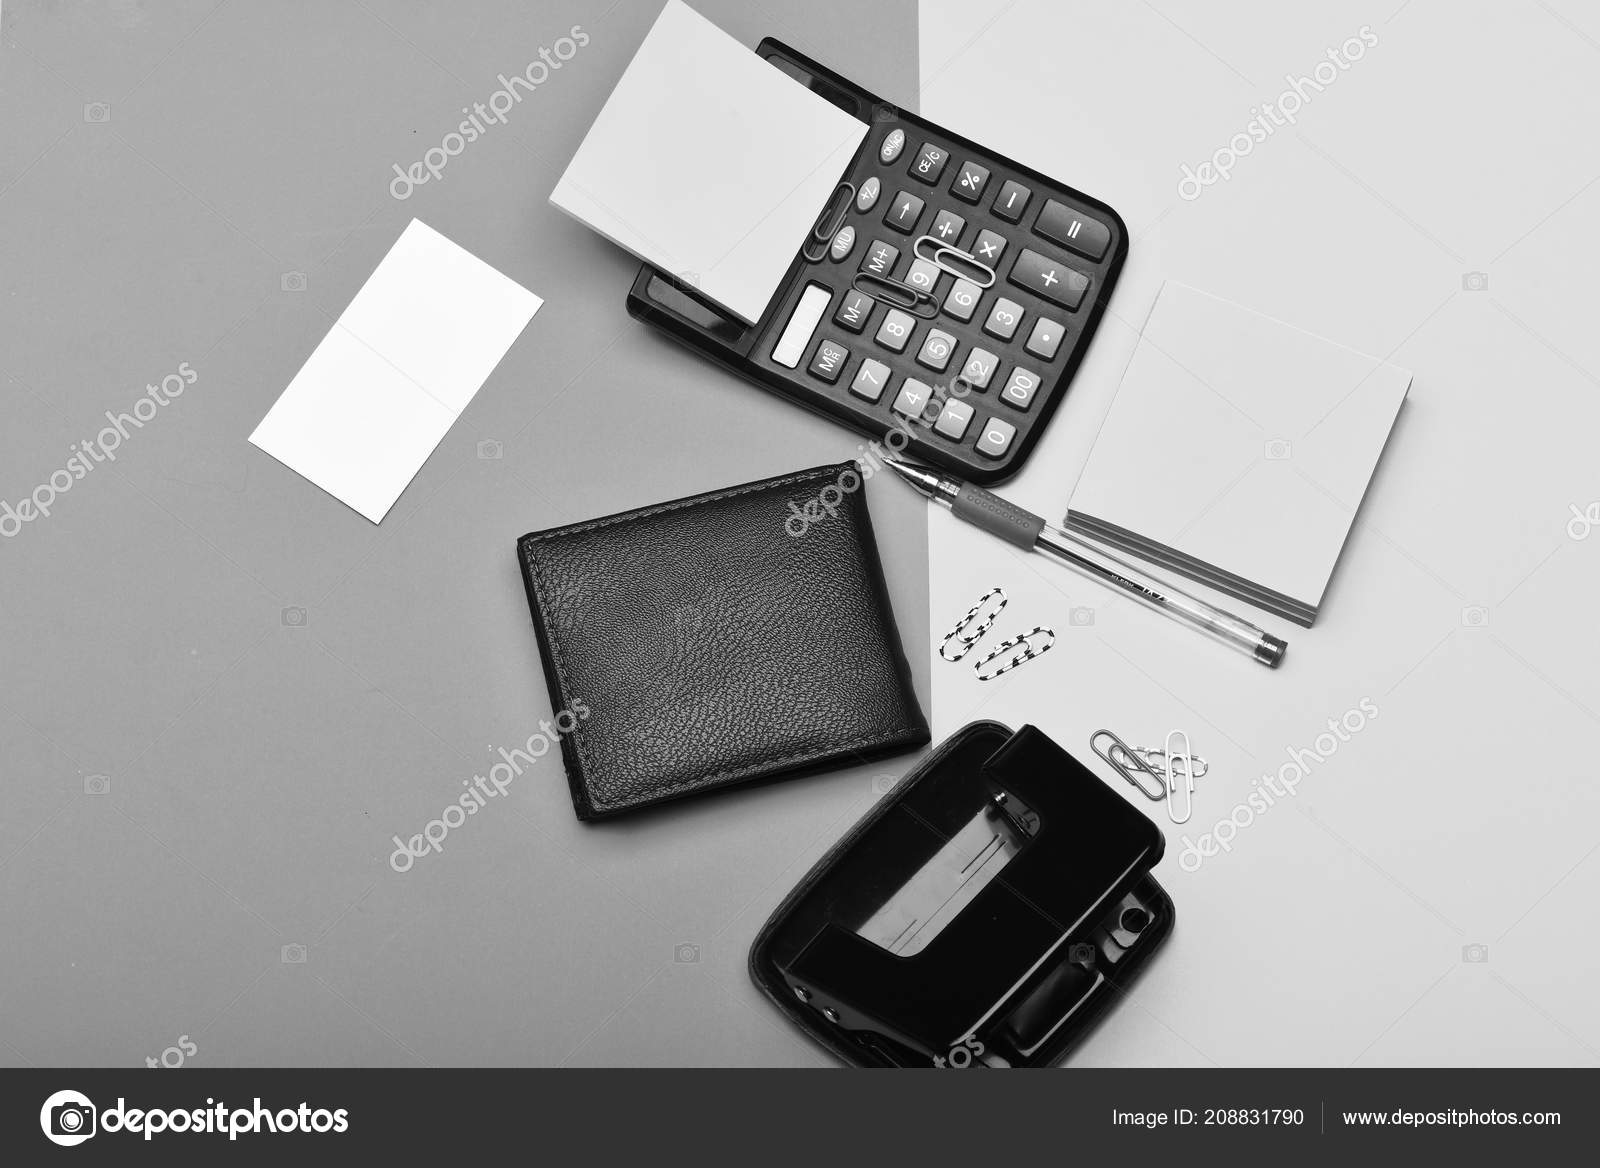 Office paper perforator isolated on white background. Office tool